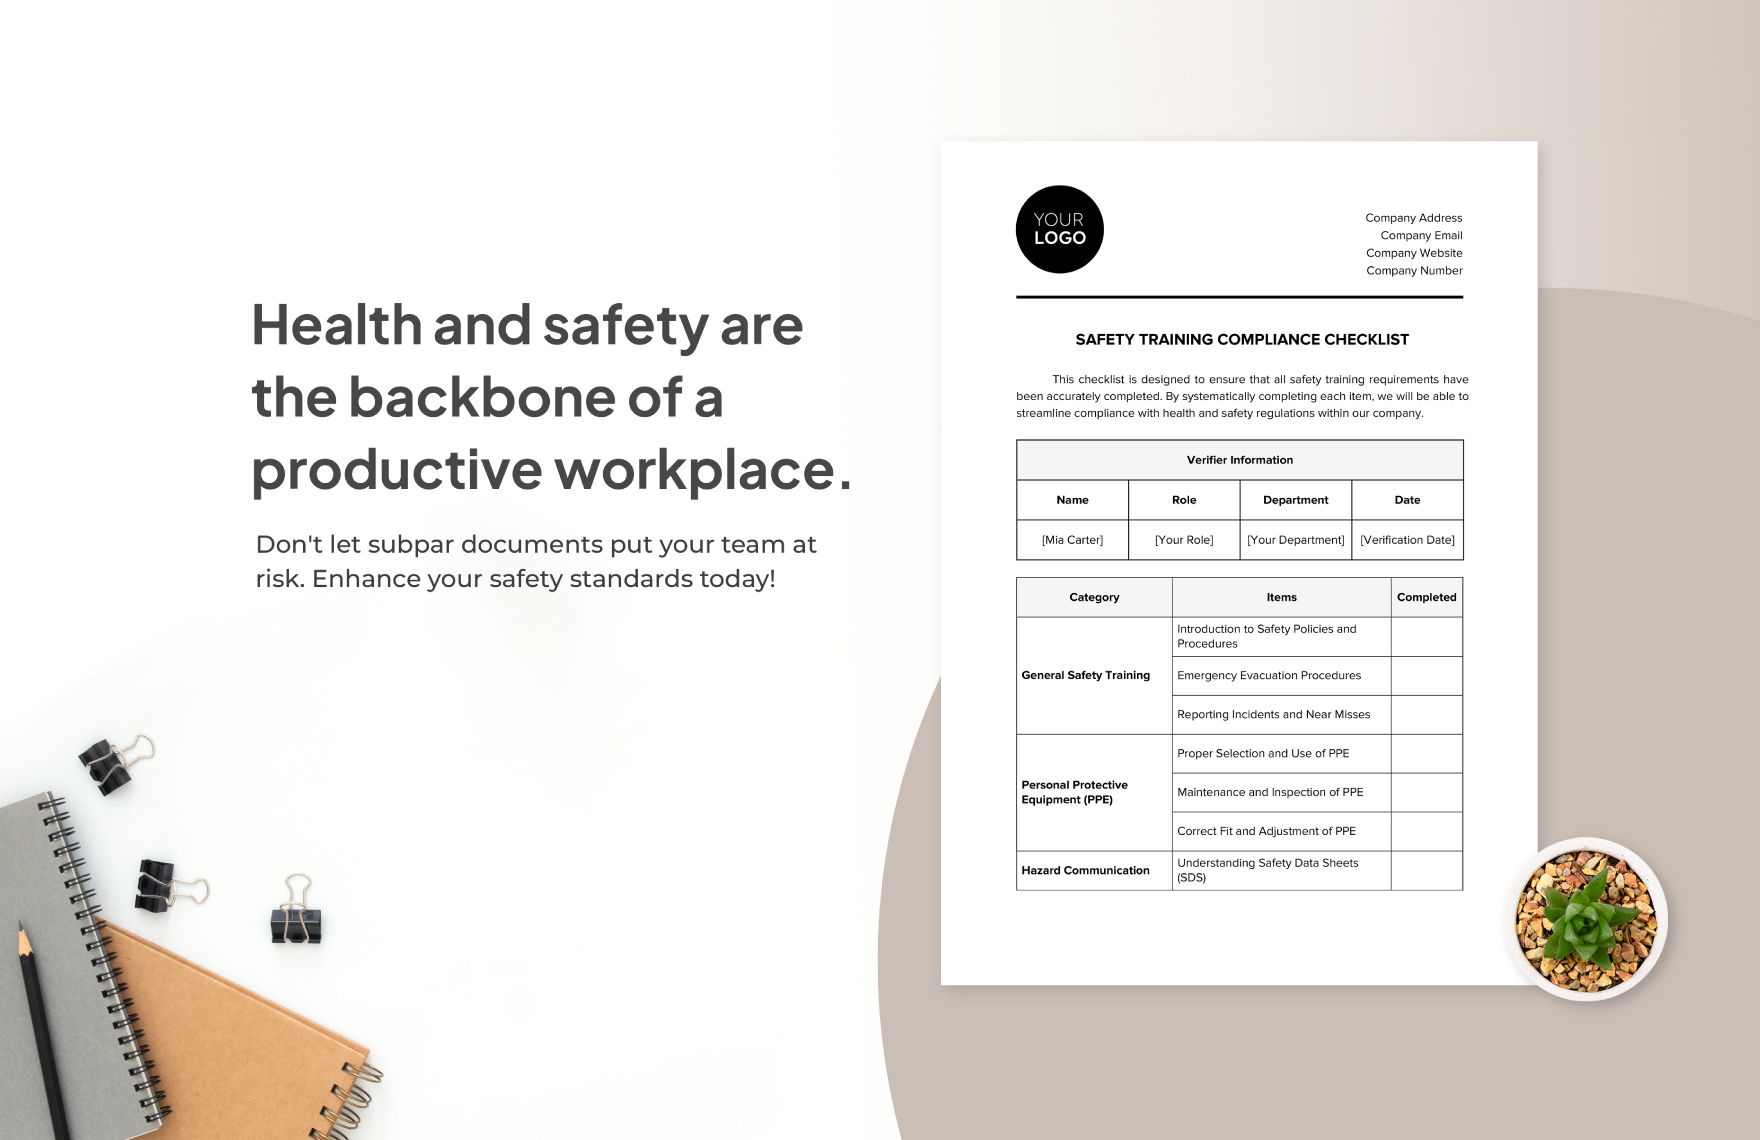 Safety Training Compliance Checklist Template